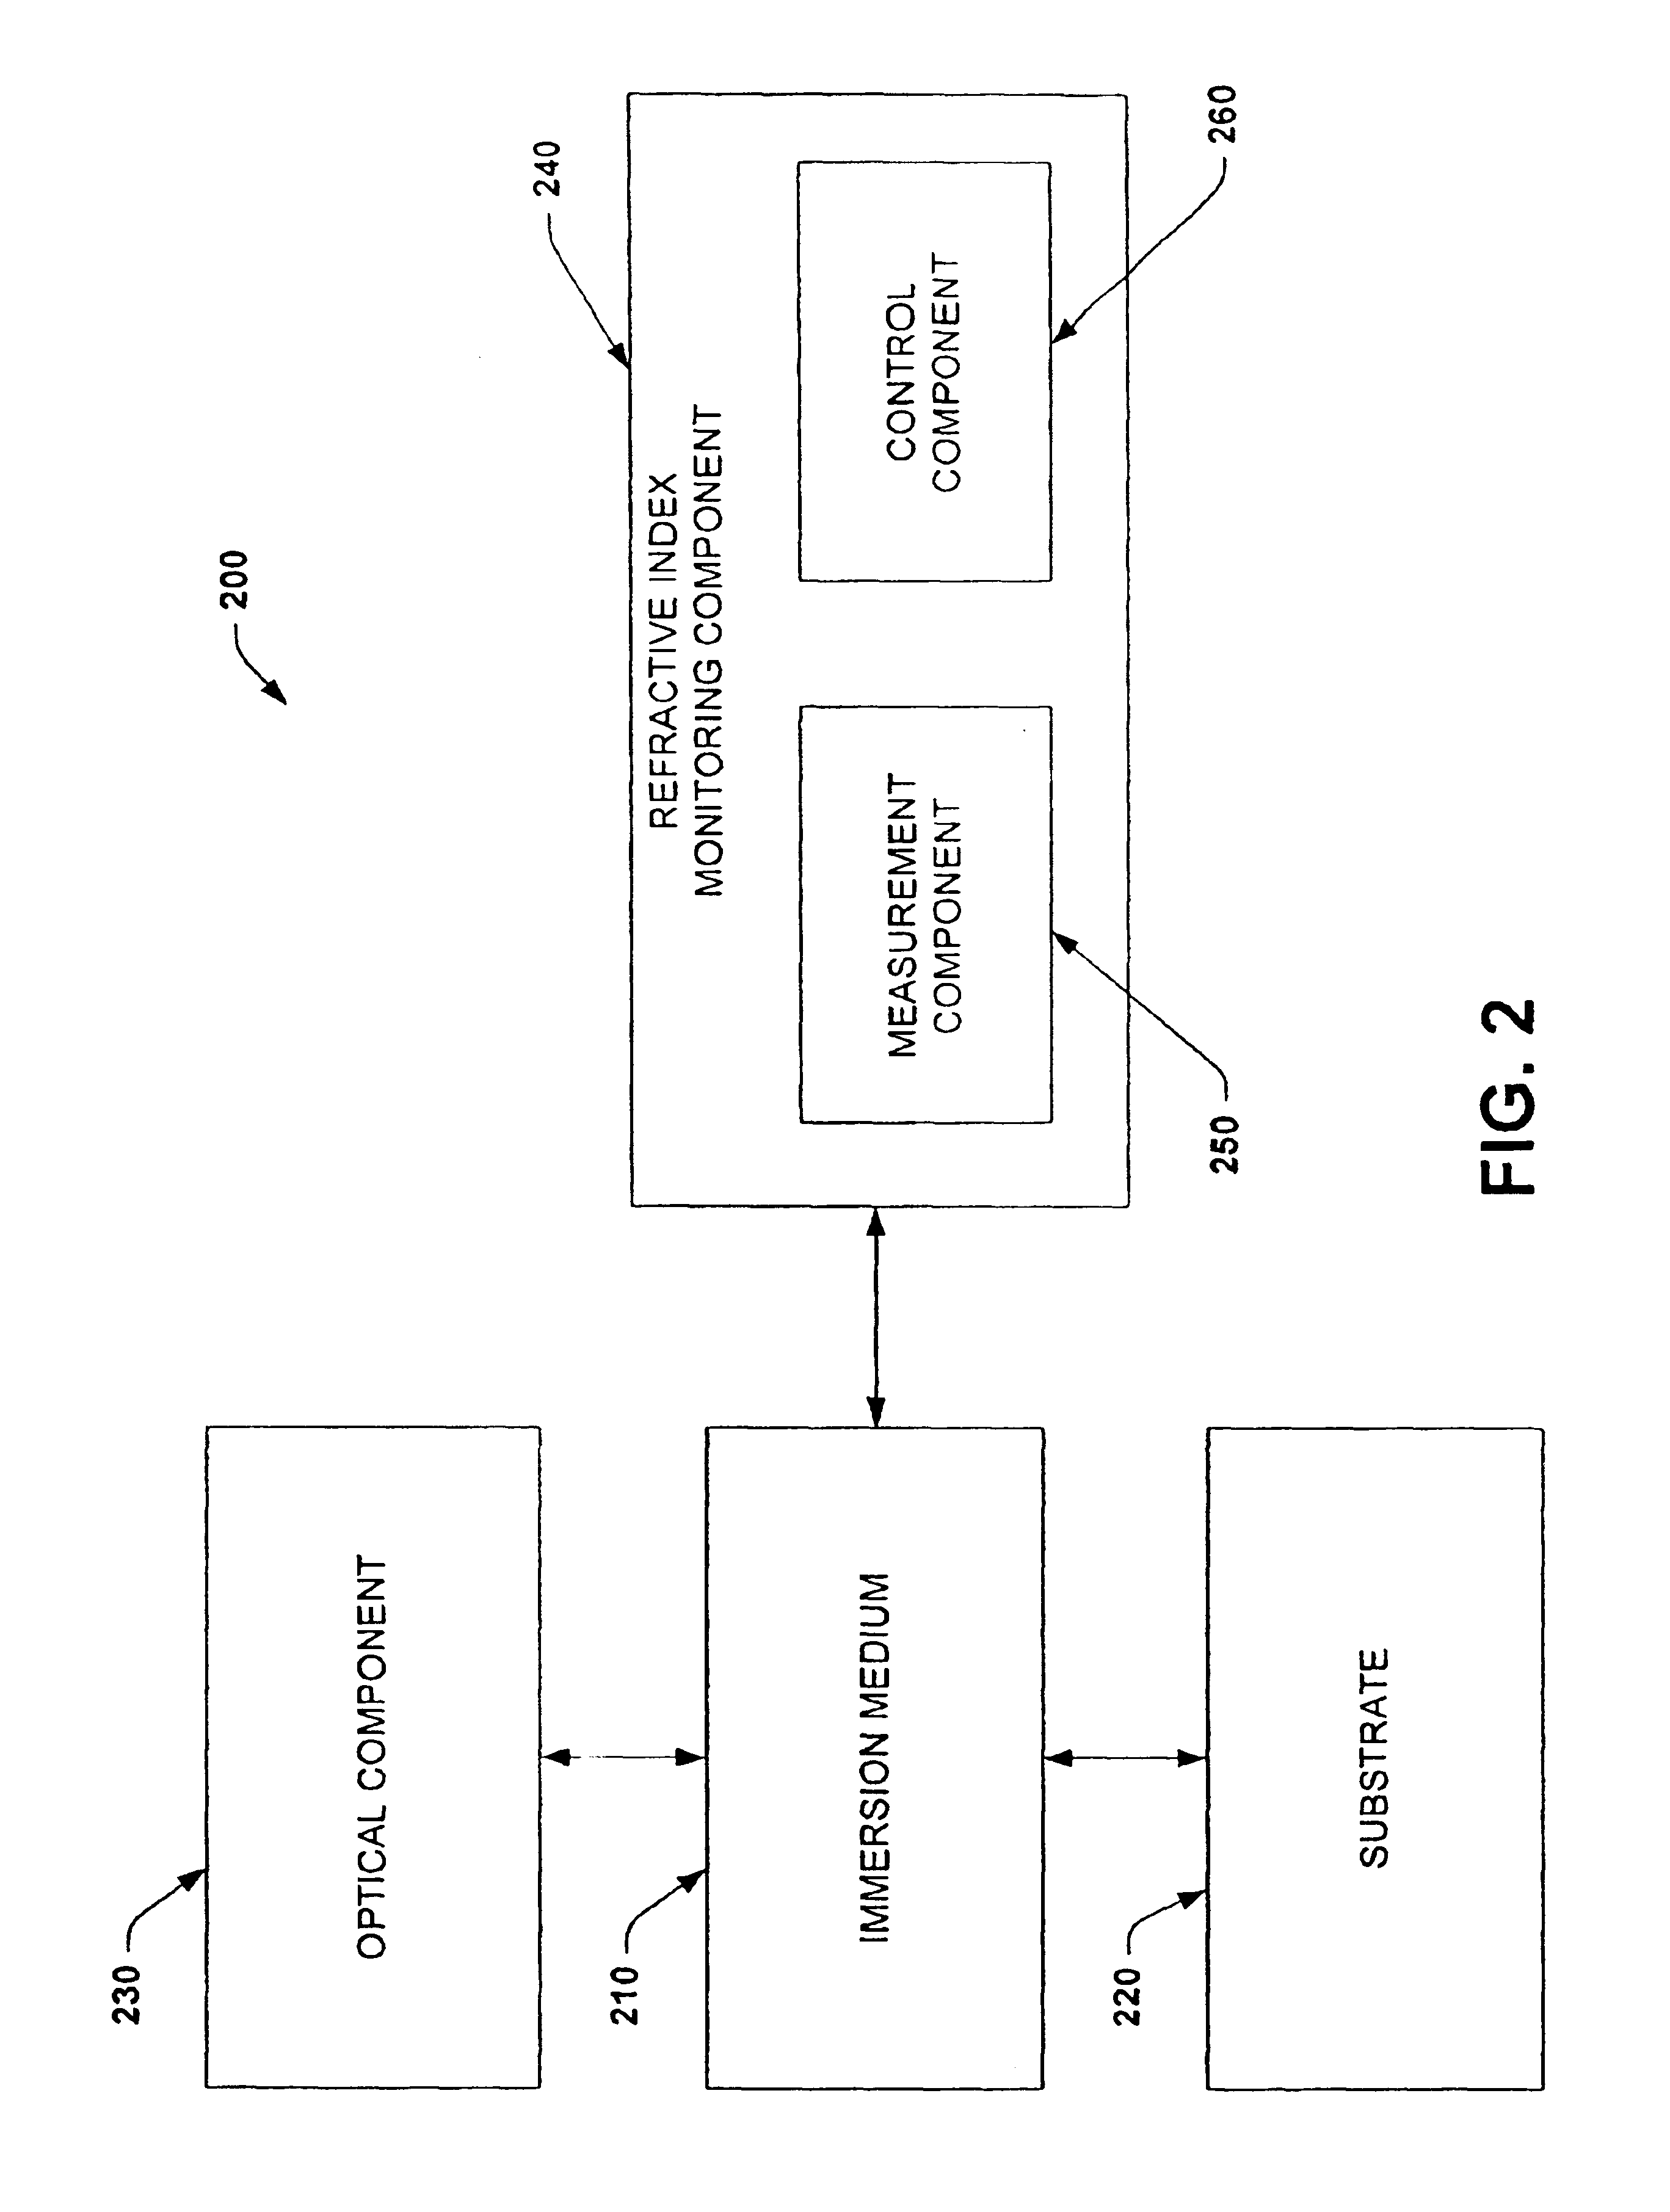 Refractive index system monitor and control for immersion lithography